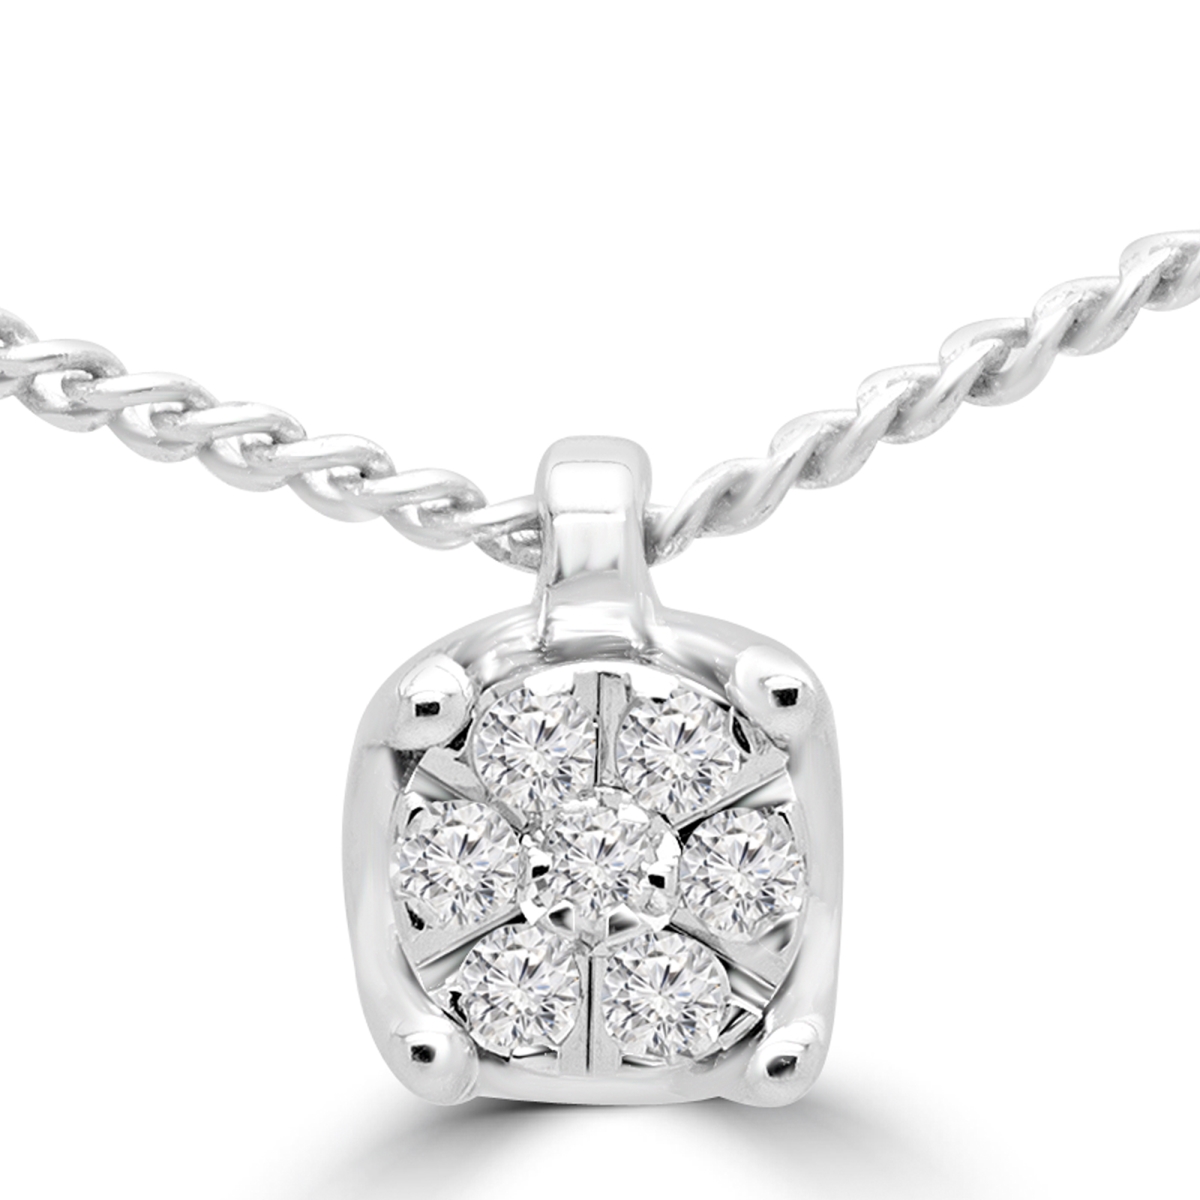 Mdr180019 0.05 Ctw Round Diamond Cluster Pendant Necklace In 10k White Gold With Chain